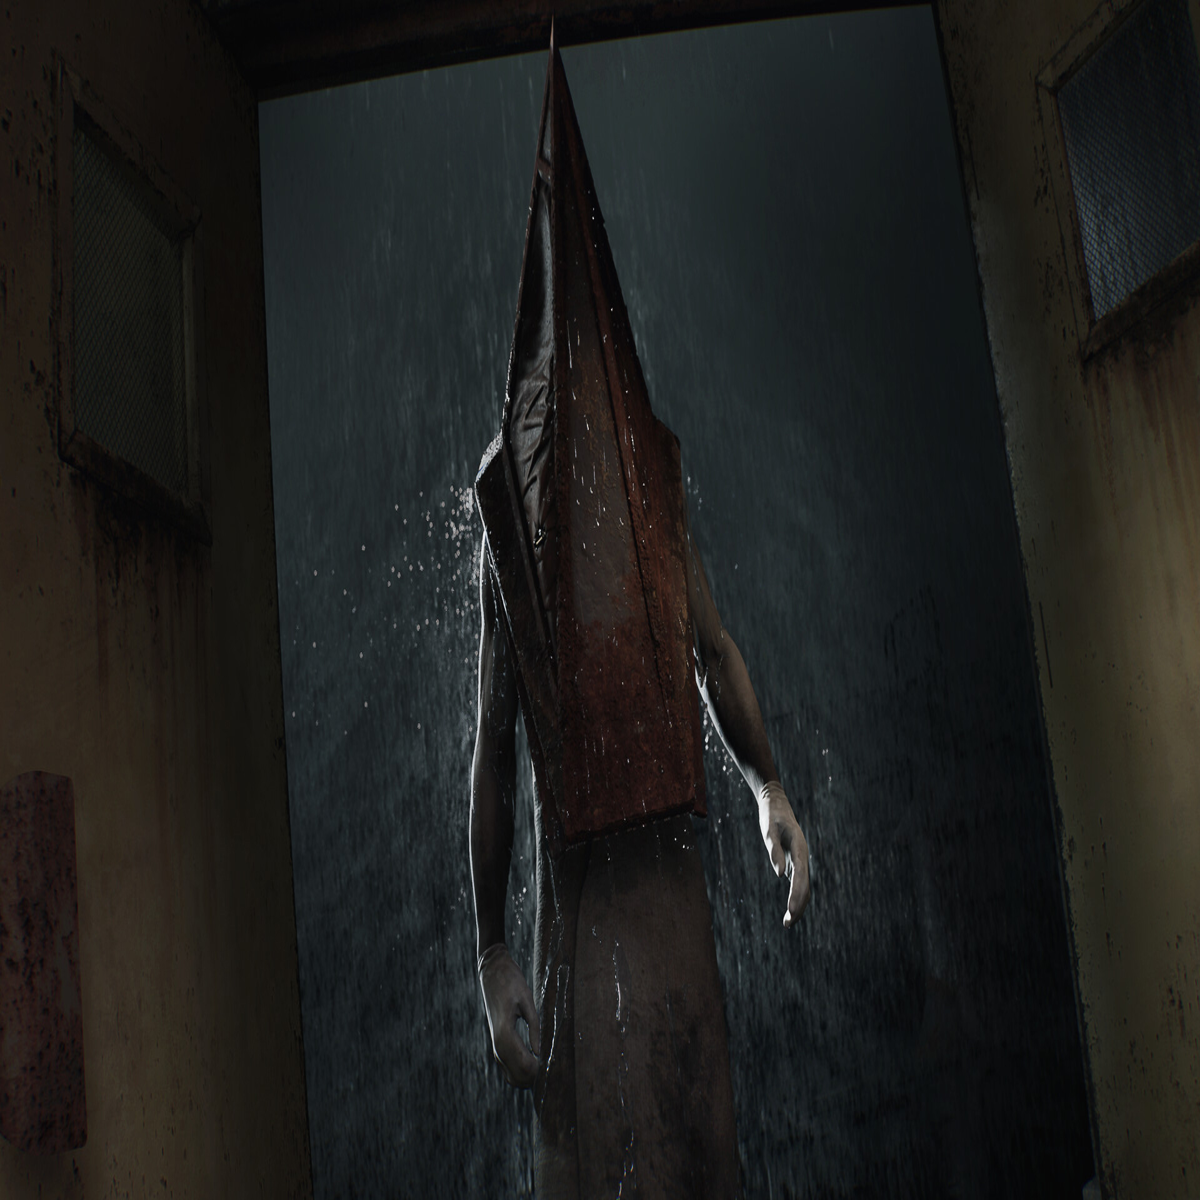 Silent Hill 2 PS5 Remake Announced as a Console Exclusive